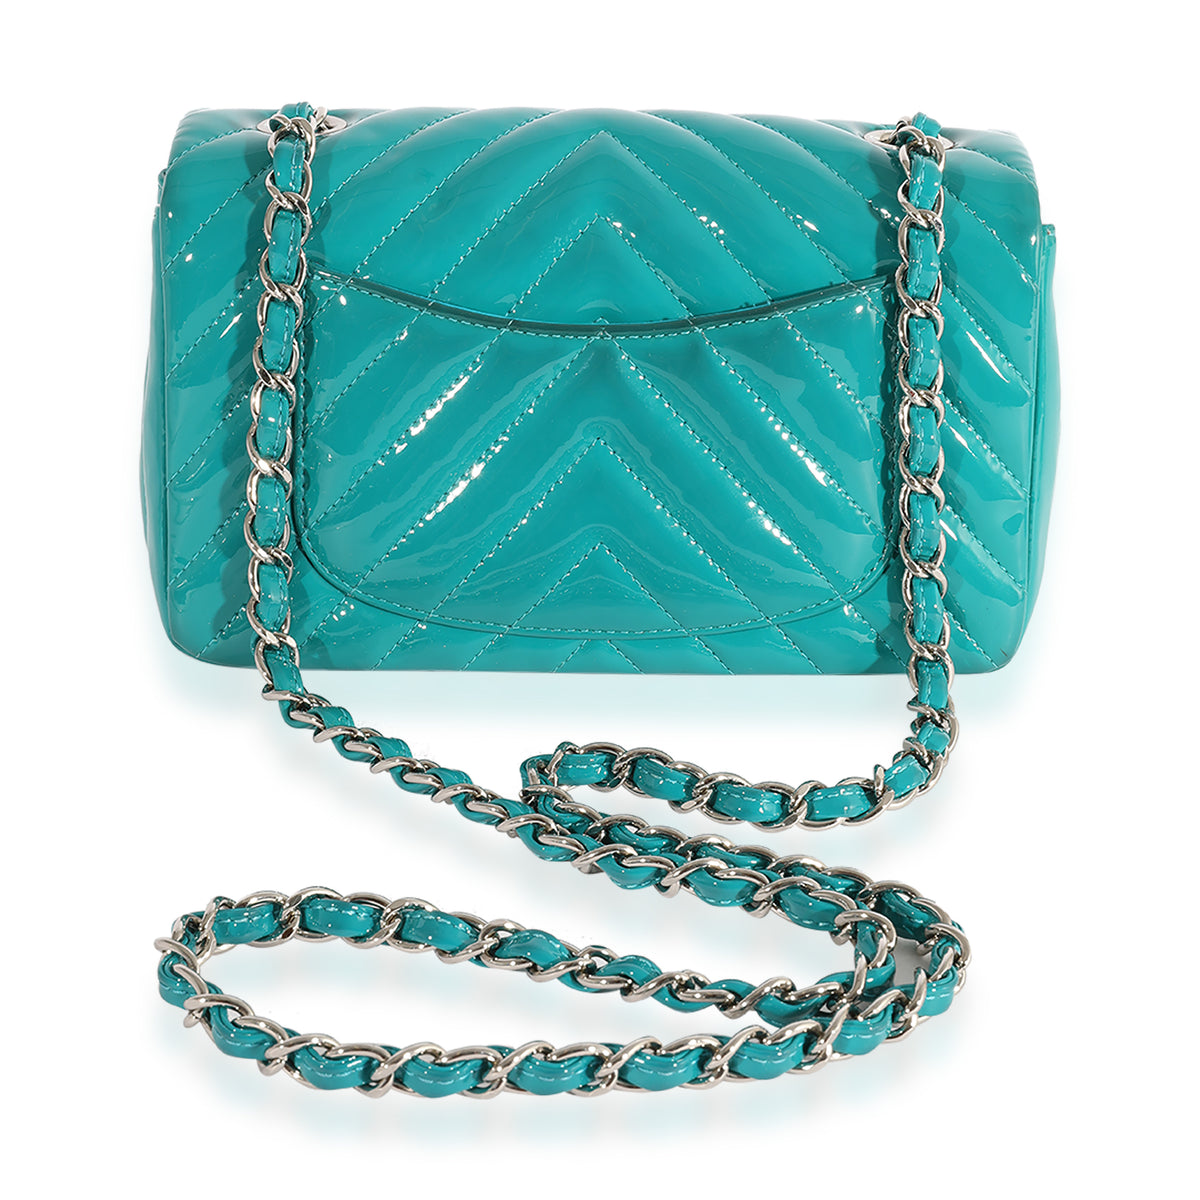 Chanel Teal Chevron Quilted Patent Leather Mini Rectangular Classic Flap Bag